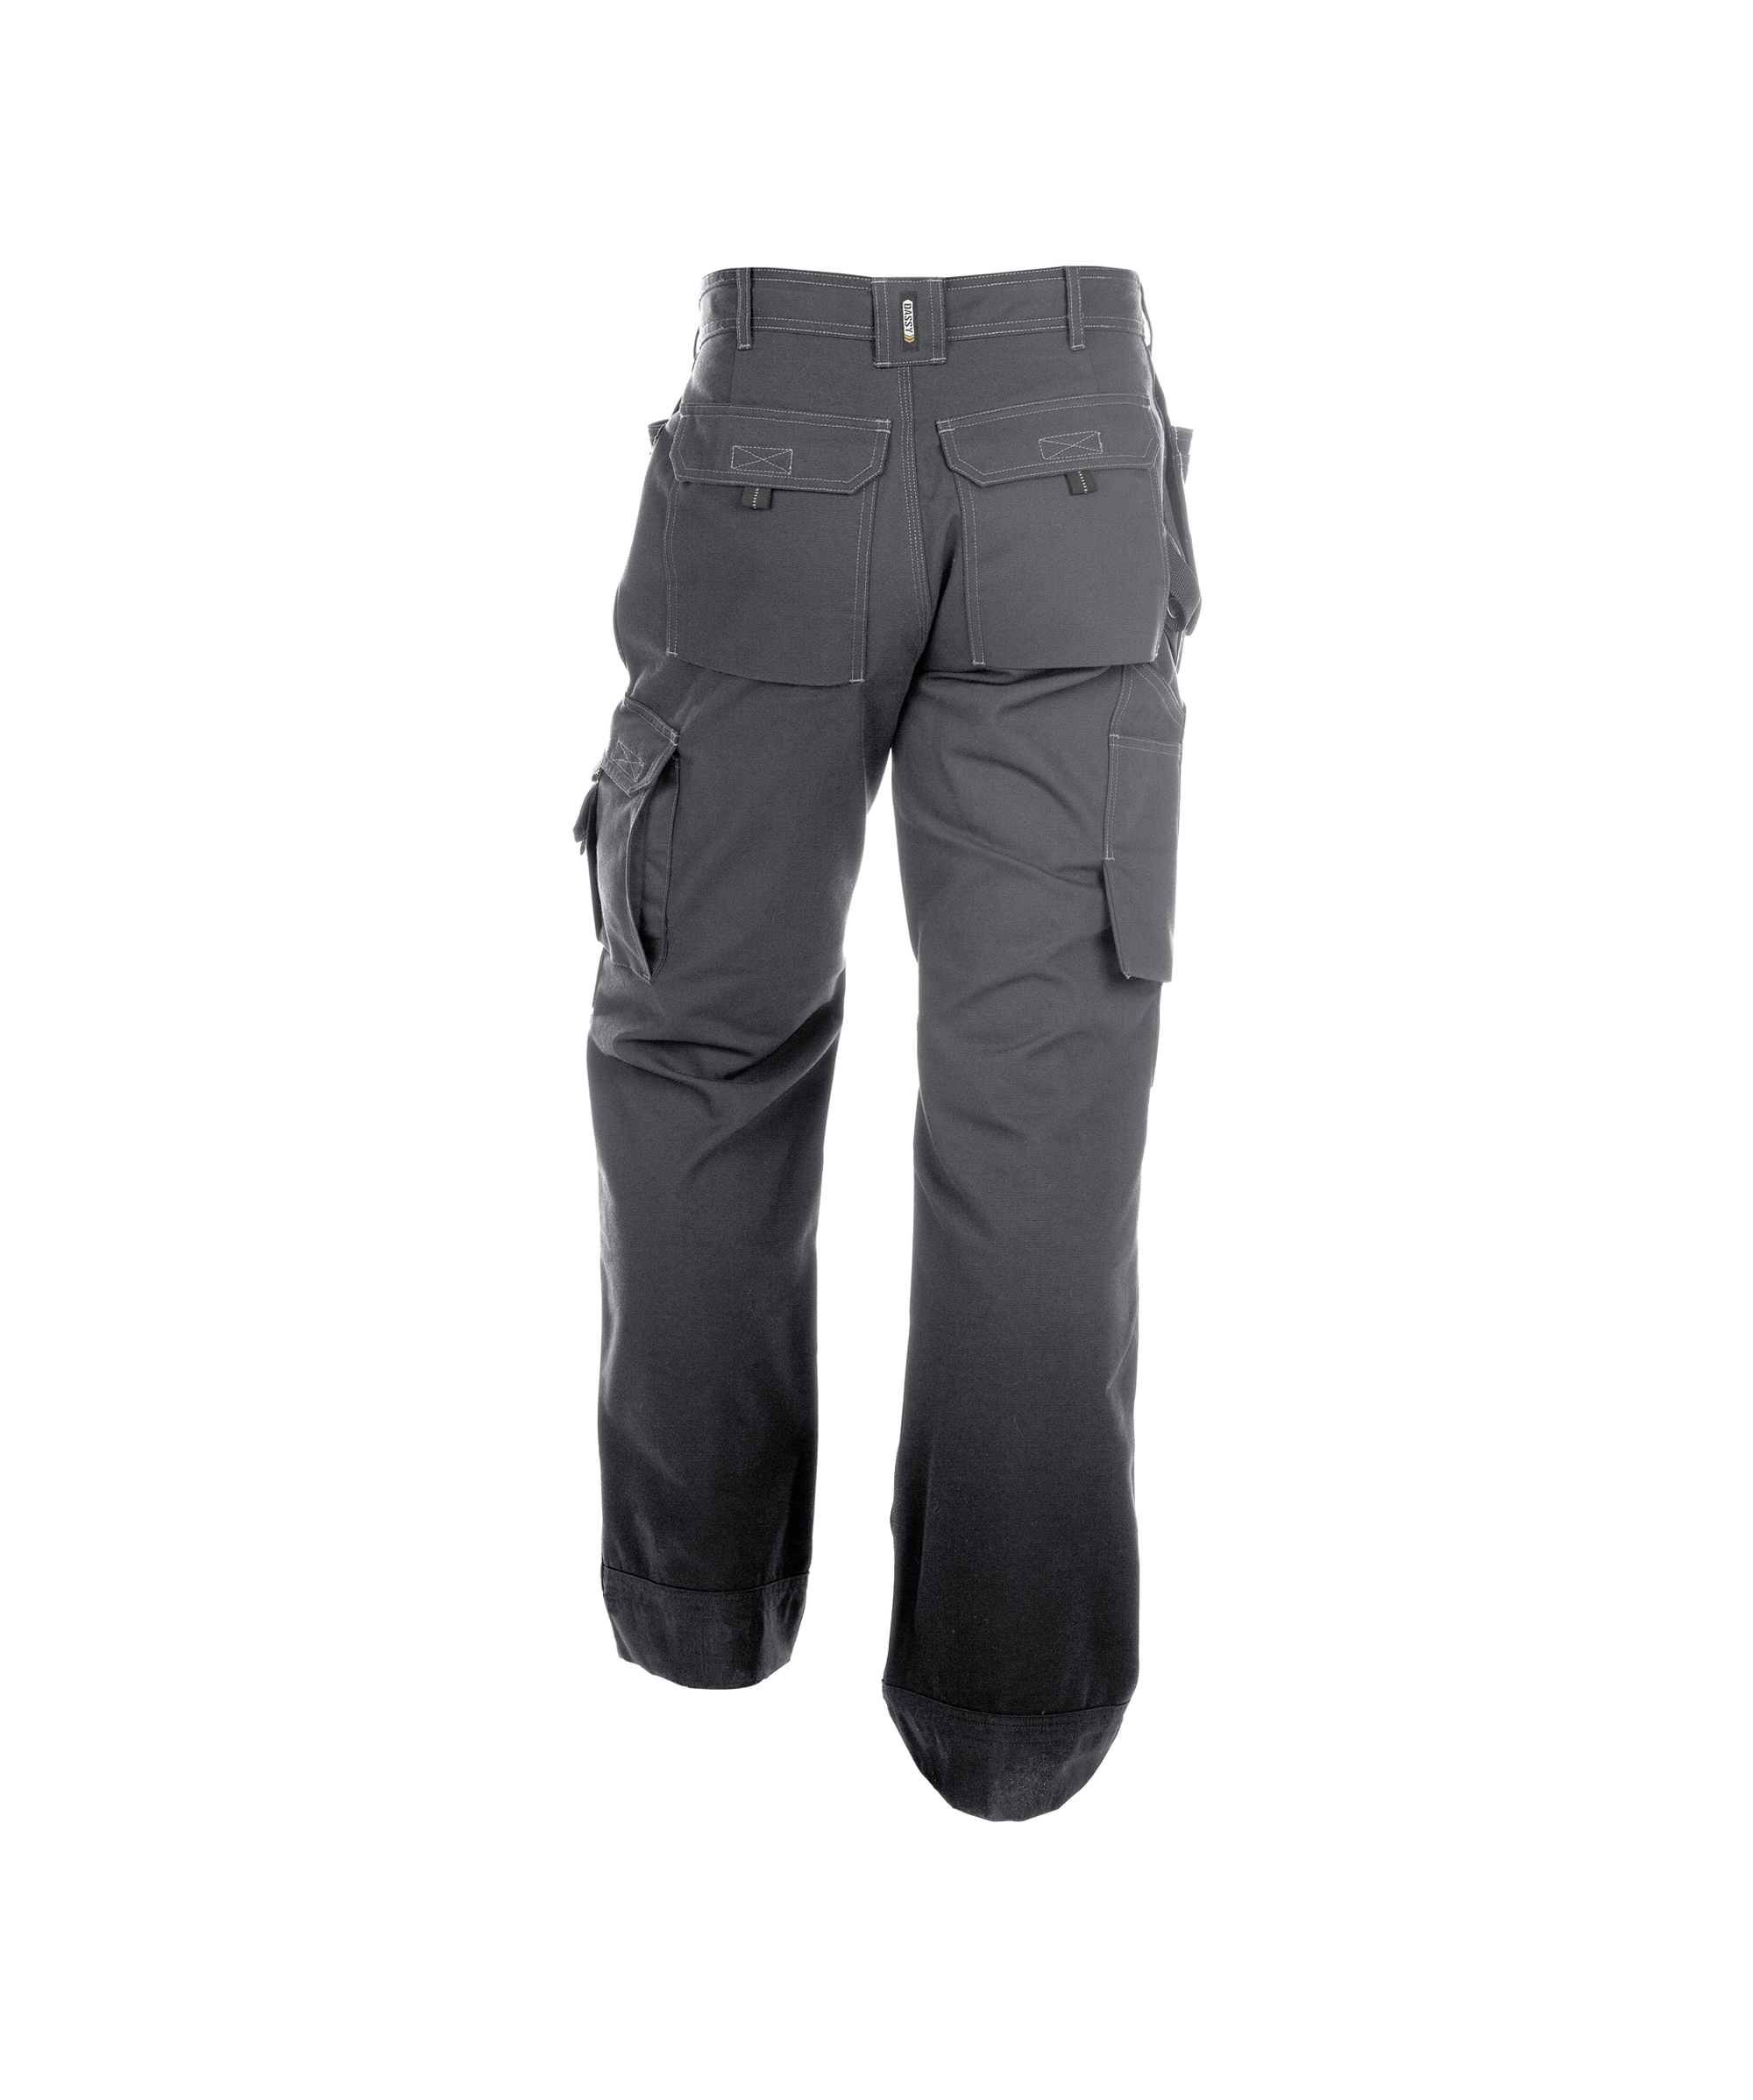 texas_canvas-work-trousers-with-multi-pockets-and-knee-pockets_cement-grey_back.jpg